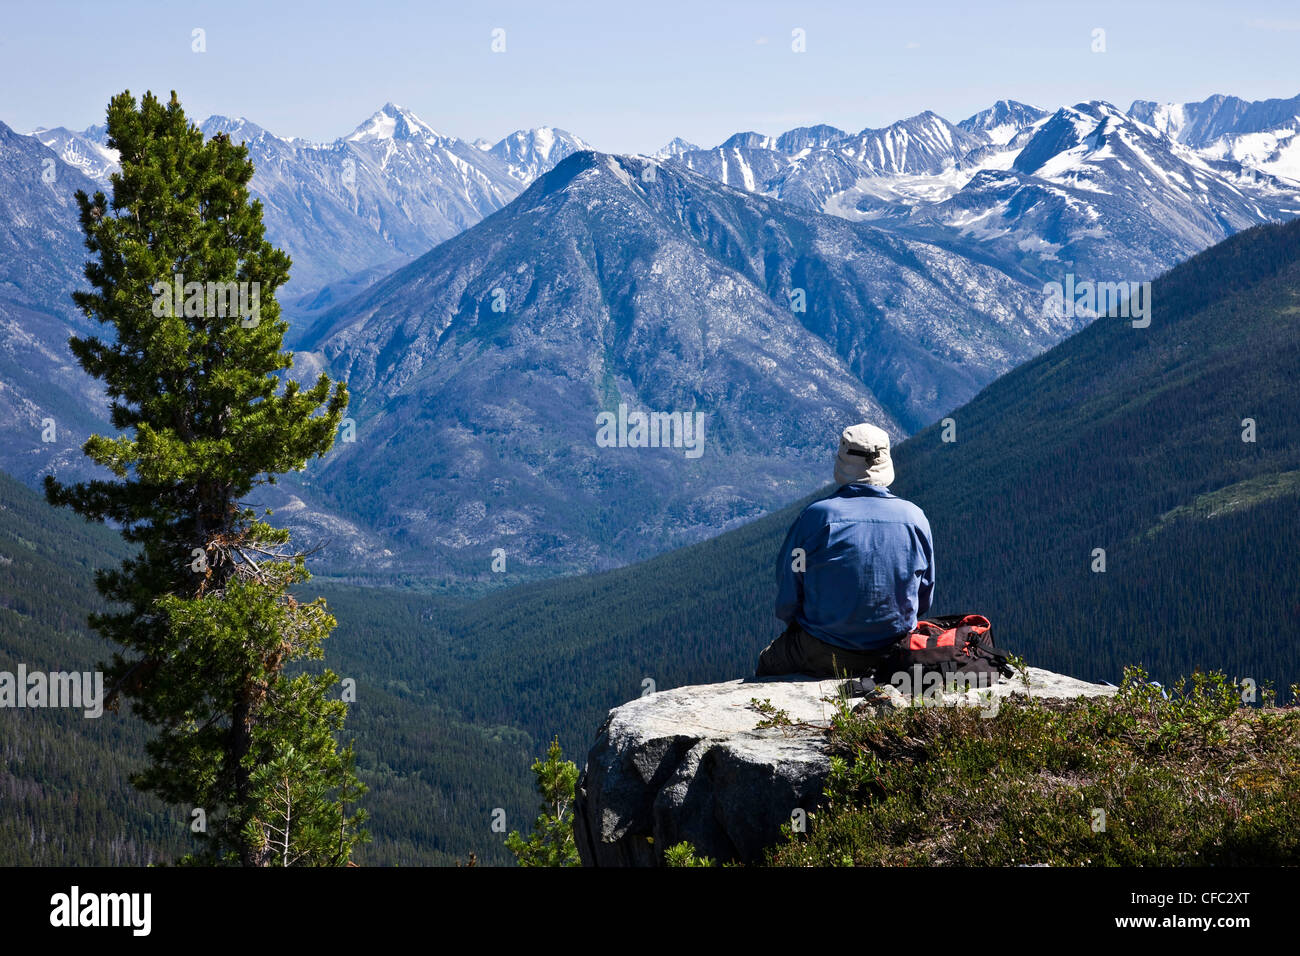 Hiking imagery made in the Charlotte Alplands within the Chilcotin region of British Columbia Canada Stock Photo